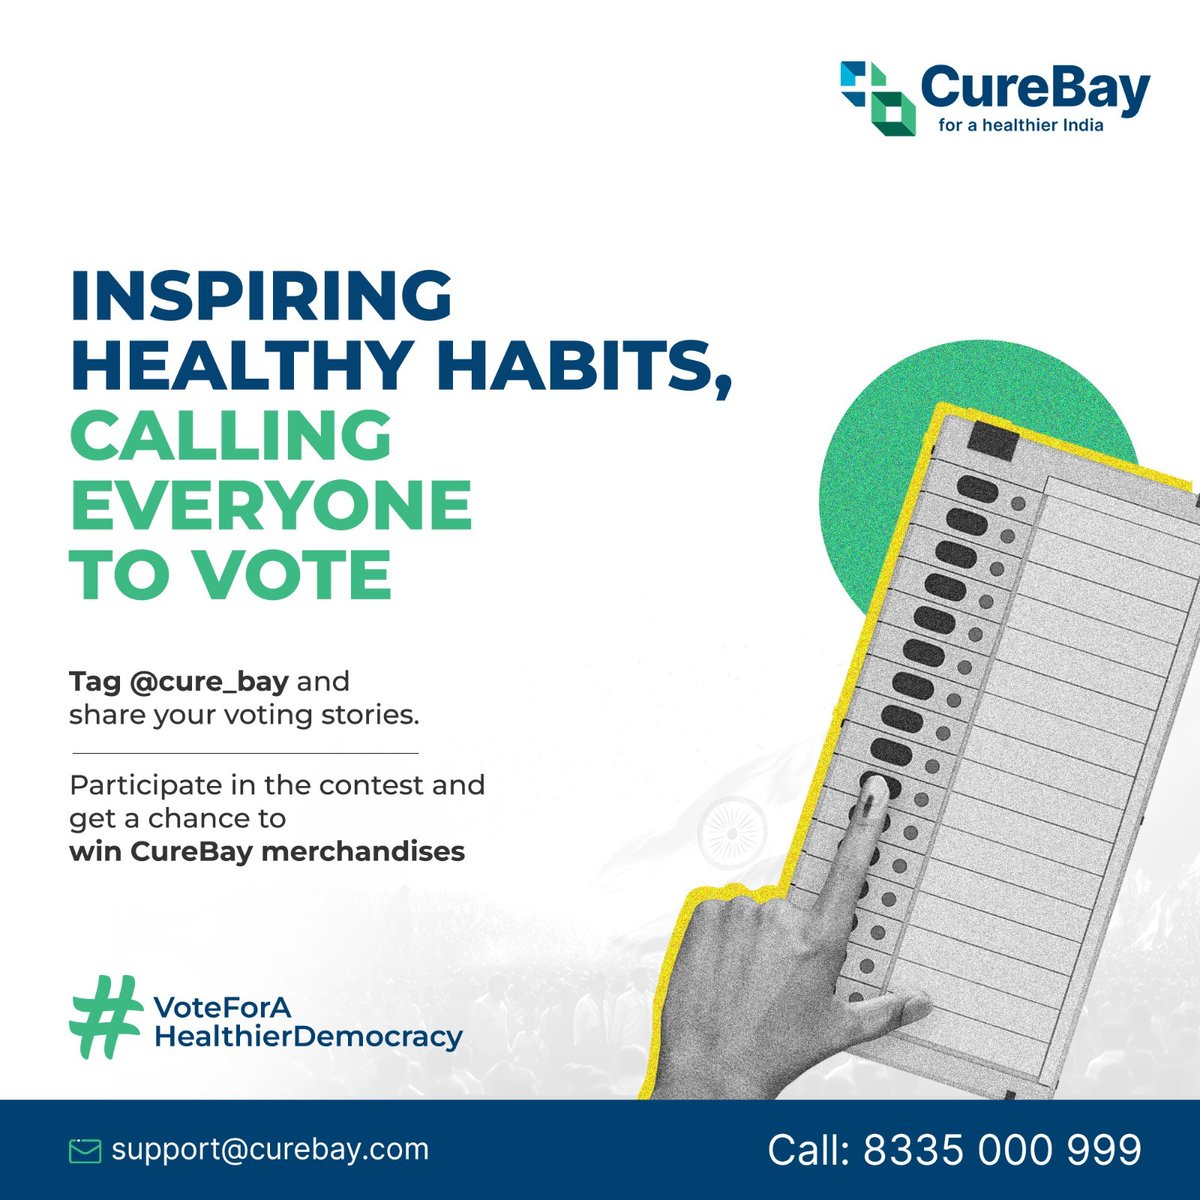 A Healthy Democracy Is Always Up for its Citizens' Welfare. Share This Post with Your Friends, Family and Companions and encourage them to Visit their polling booths and Cast their Votes.

#VoteKaro #voteforahealthierindia #CureBay #HealthcareForAll